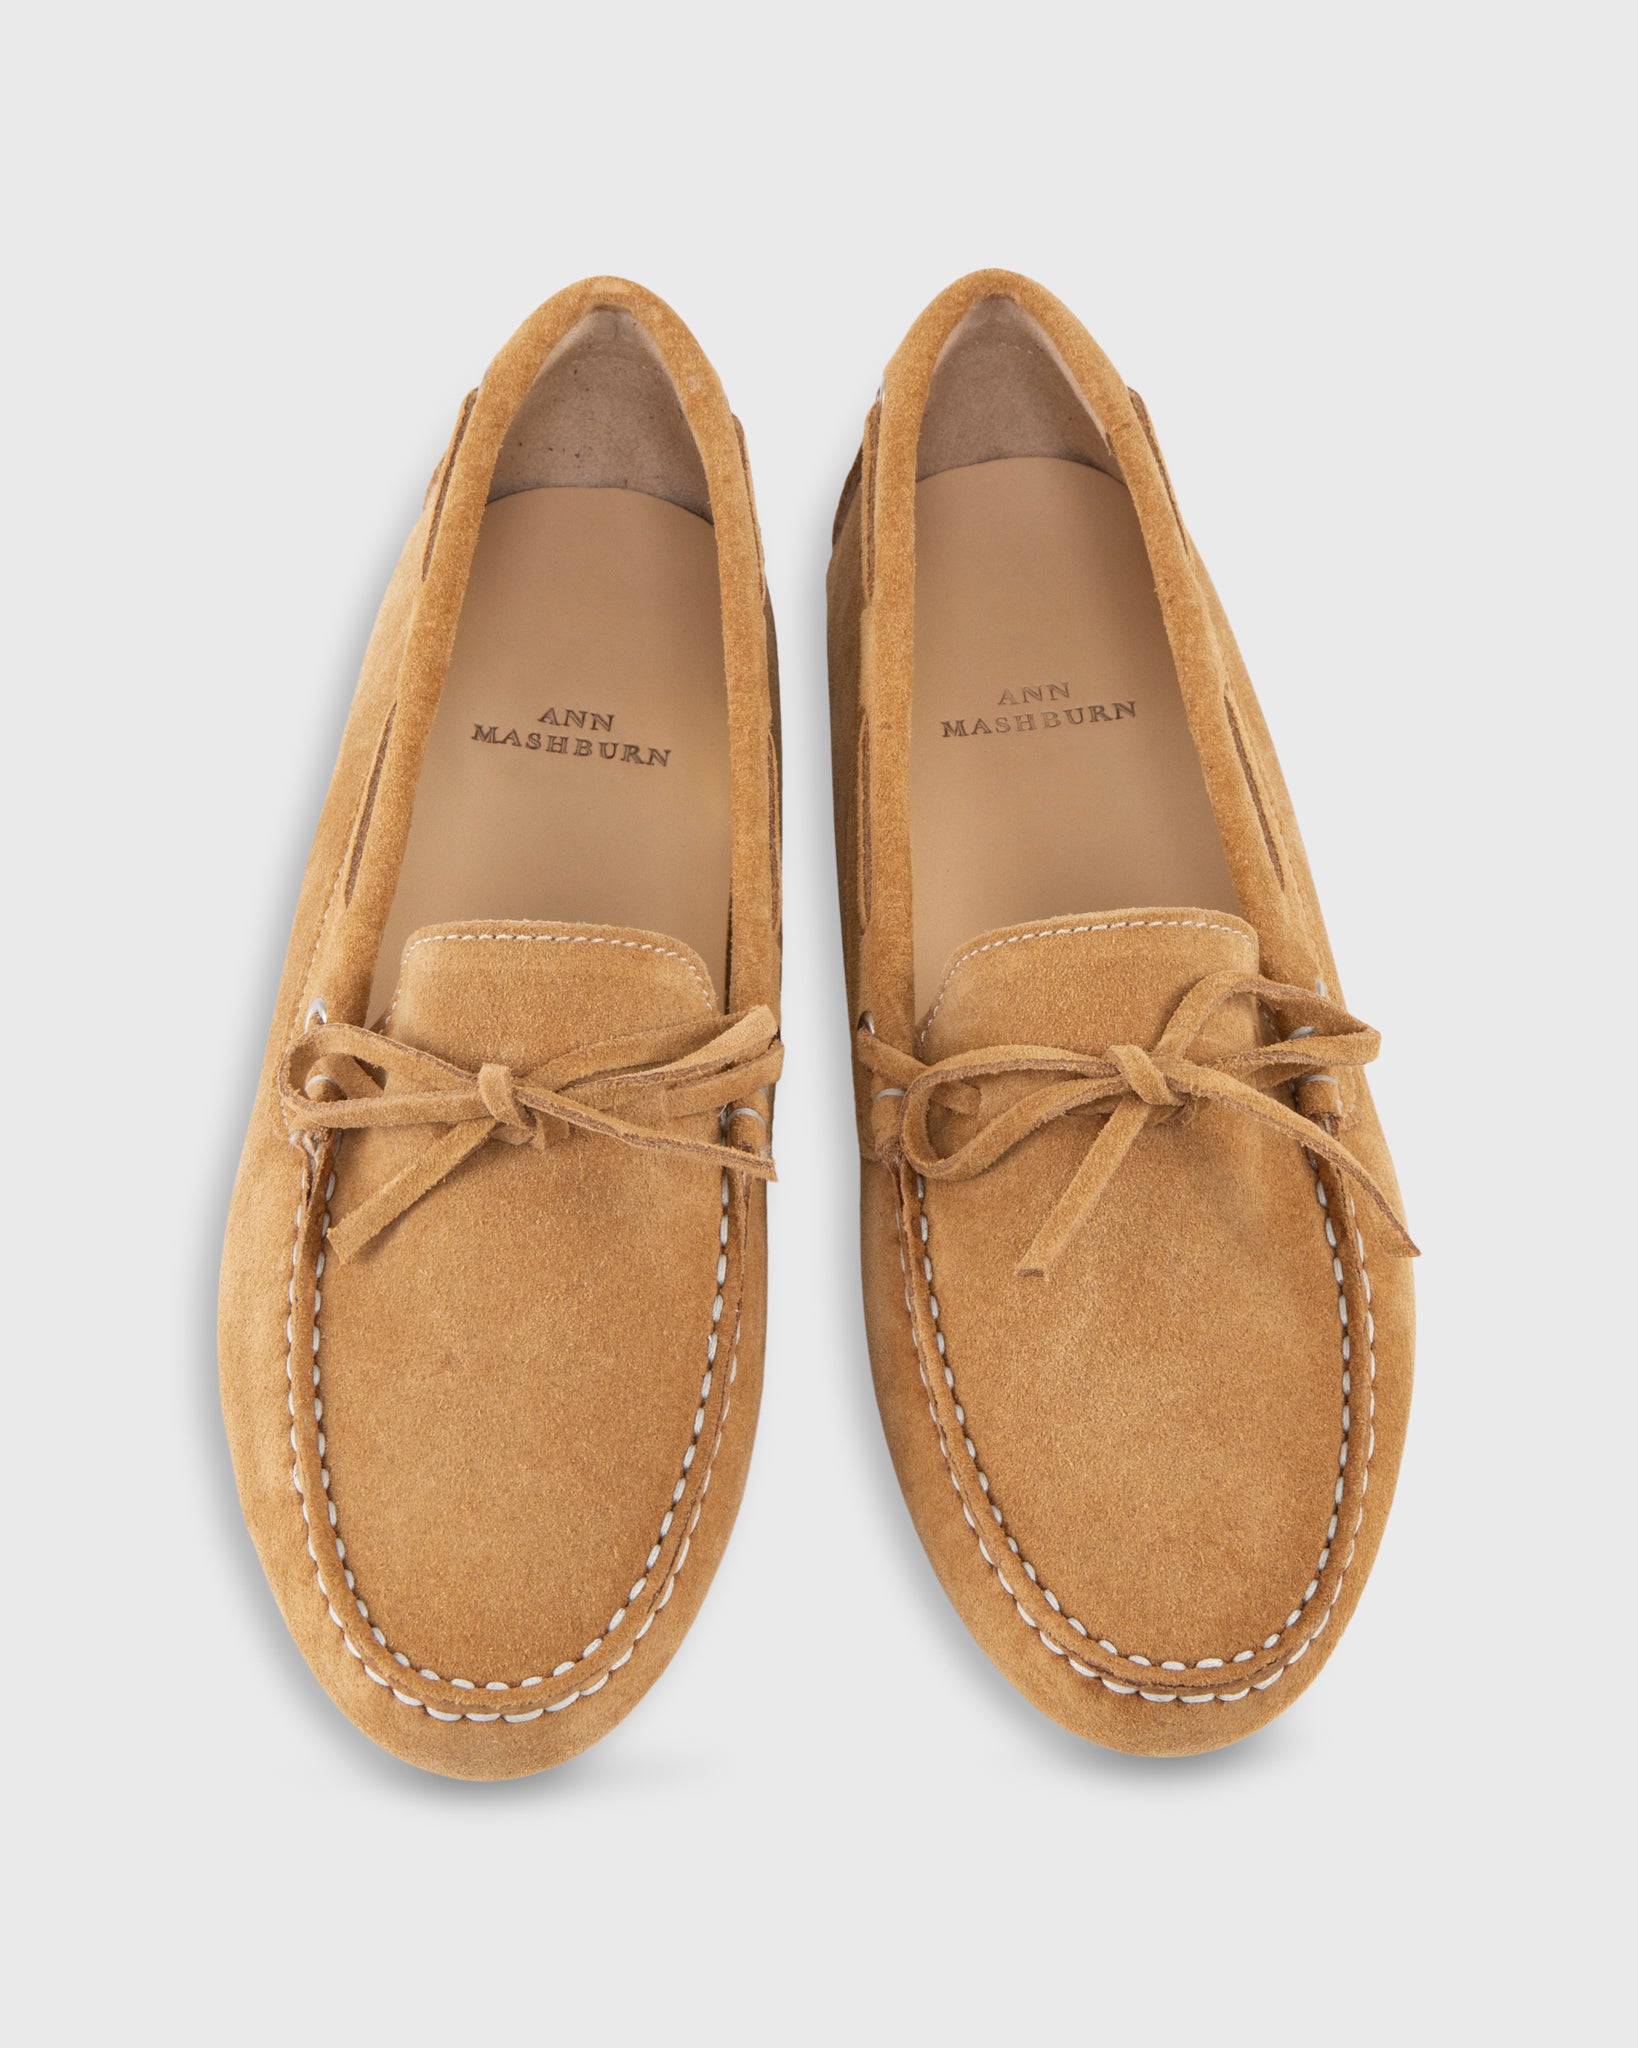 Driving Moccasin in Camel Suede